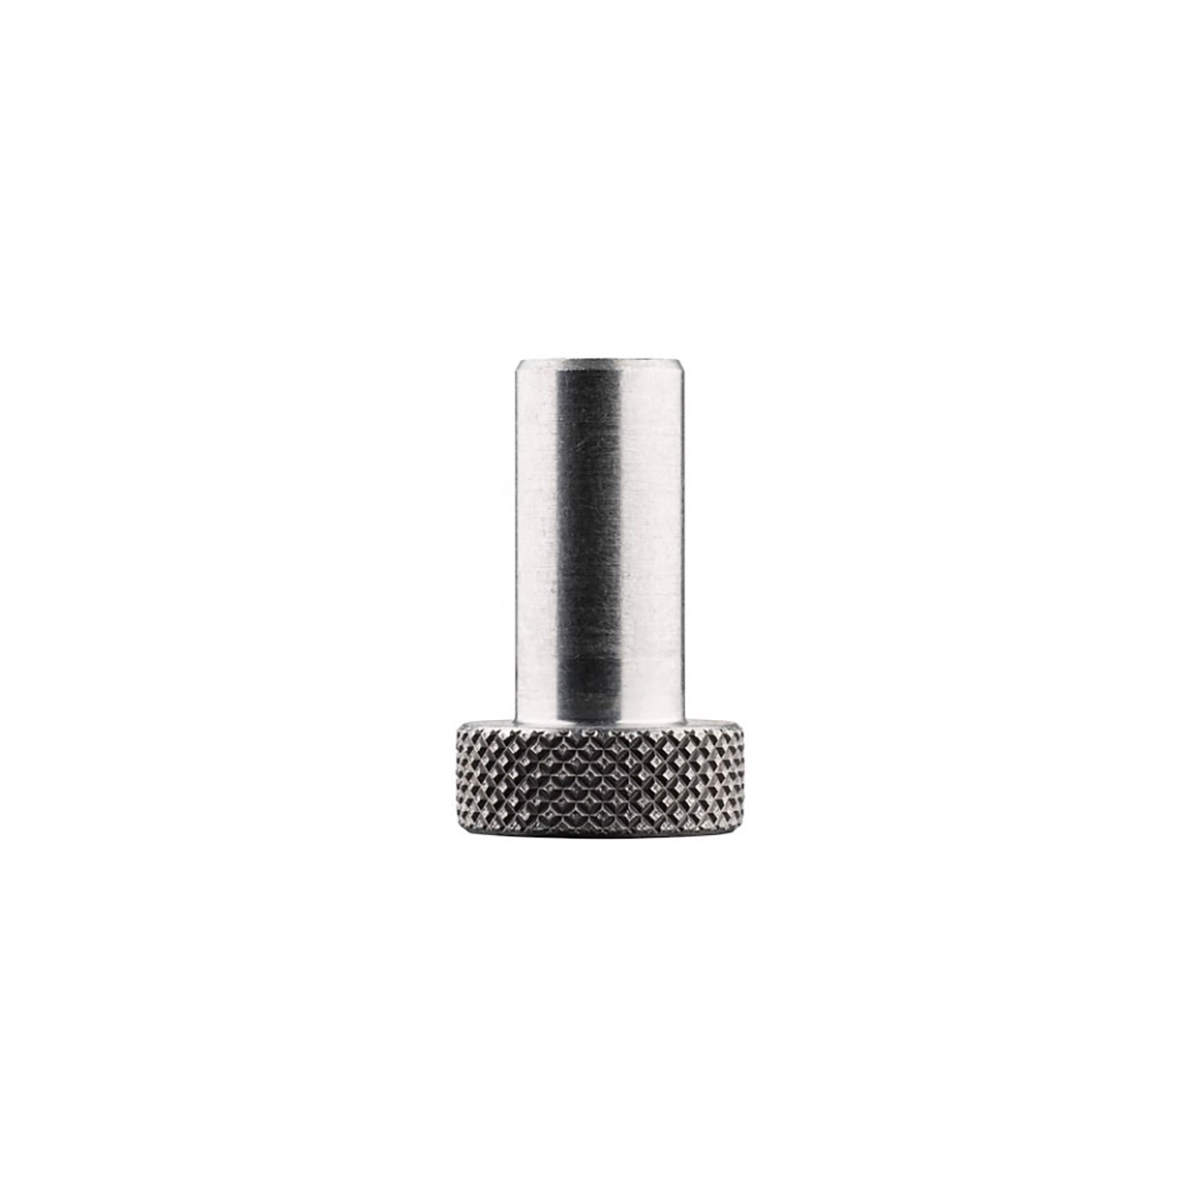 Manfrotto 149 Adapter Stift 3/8" - 1/4"